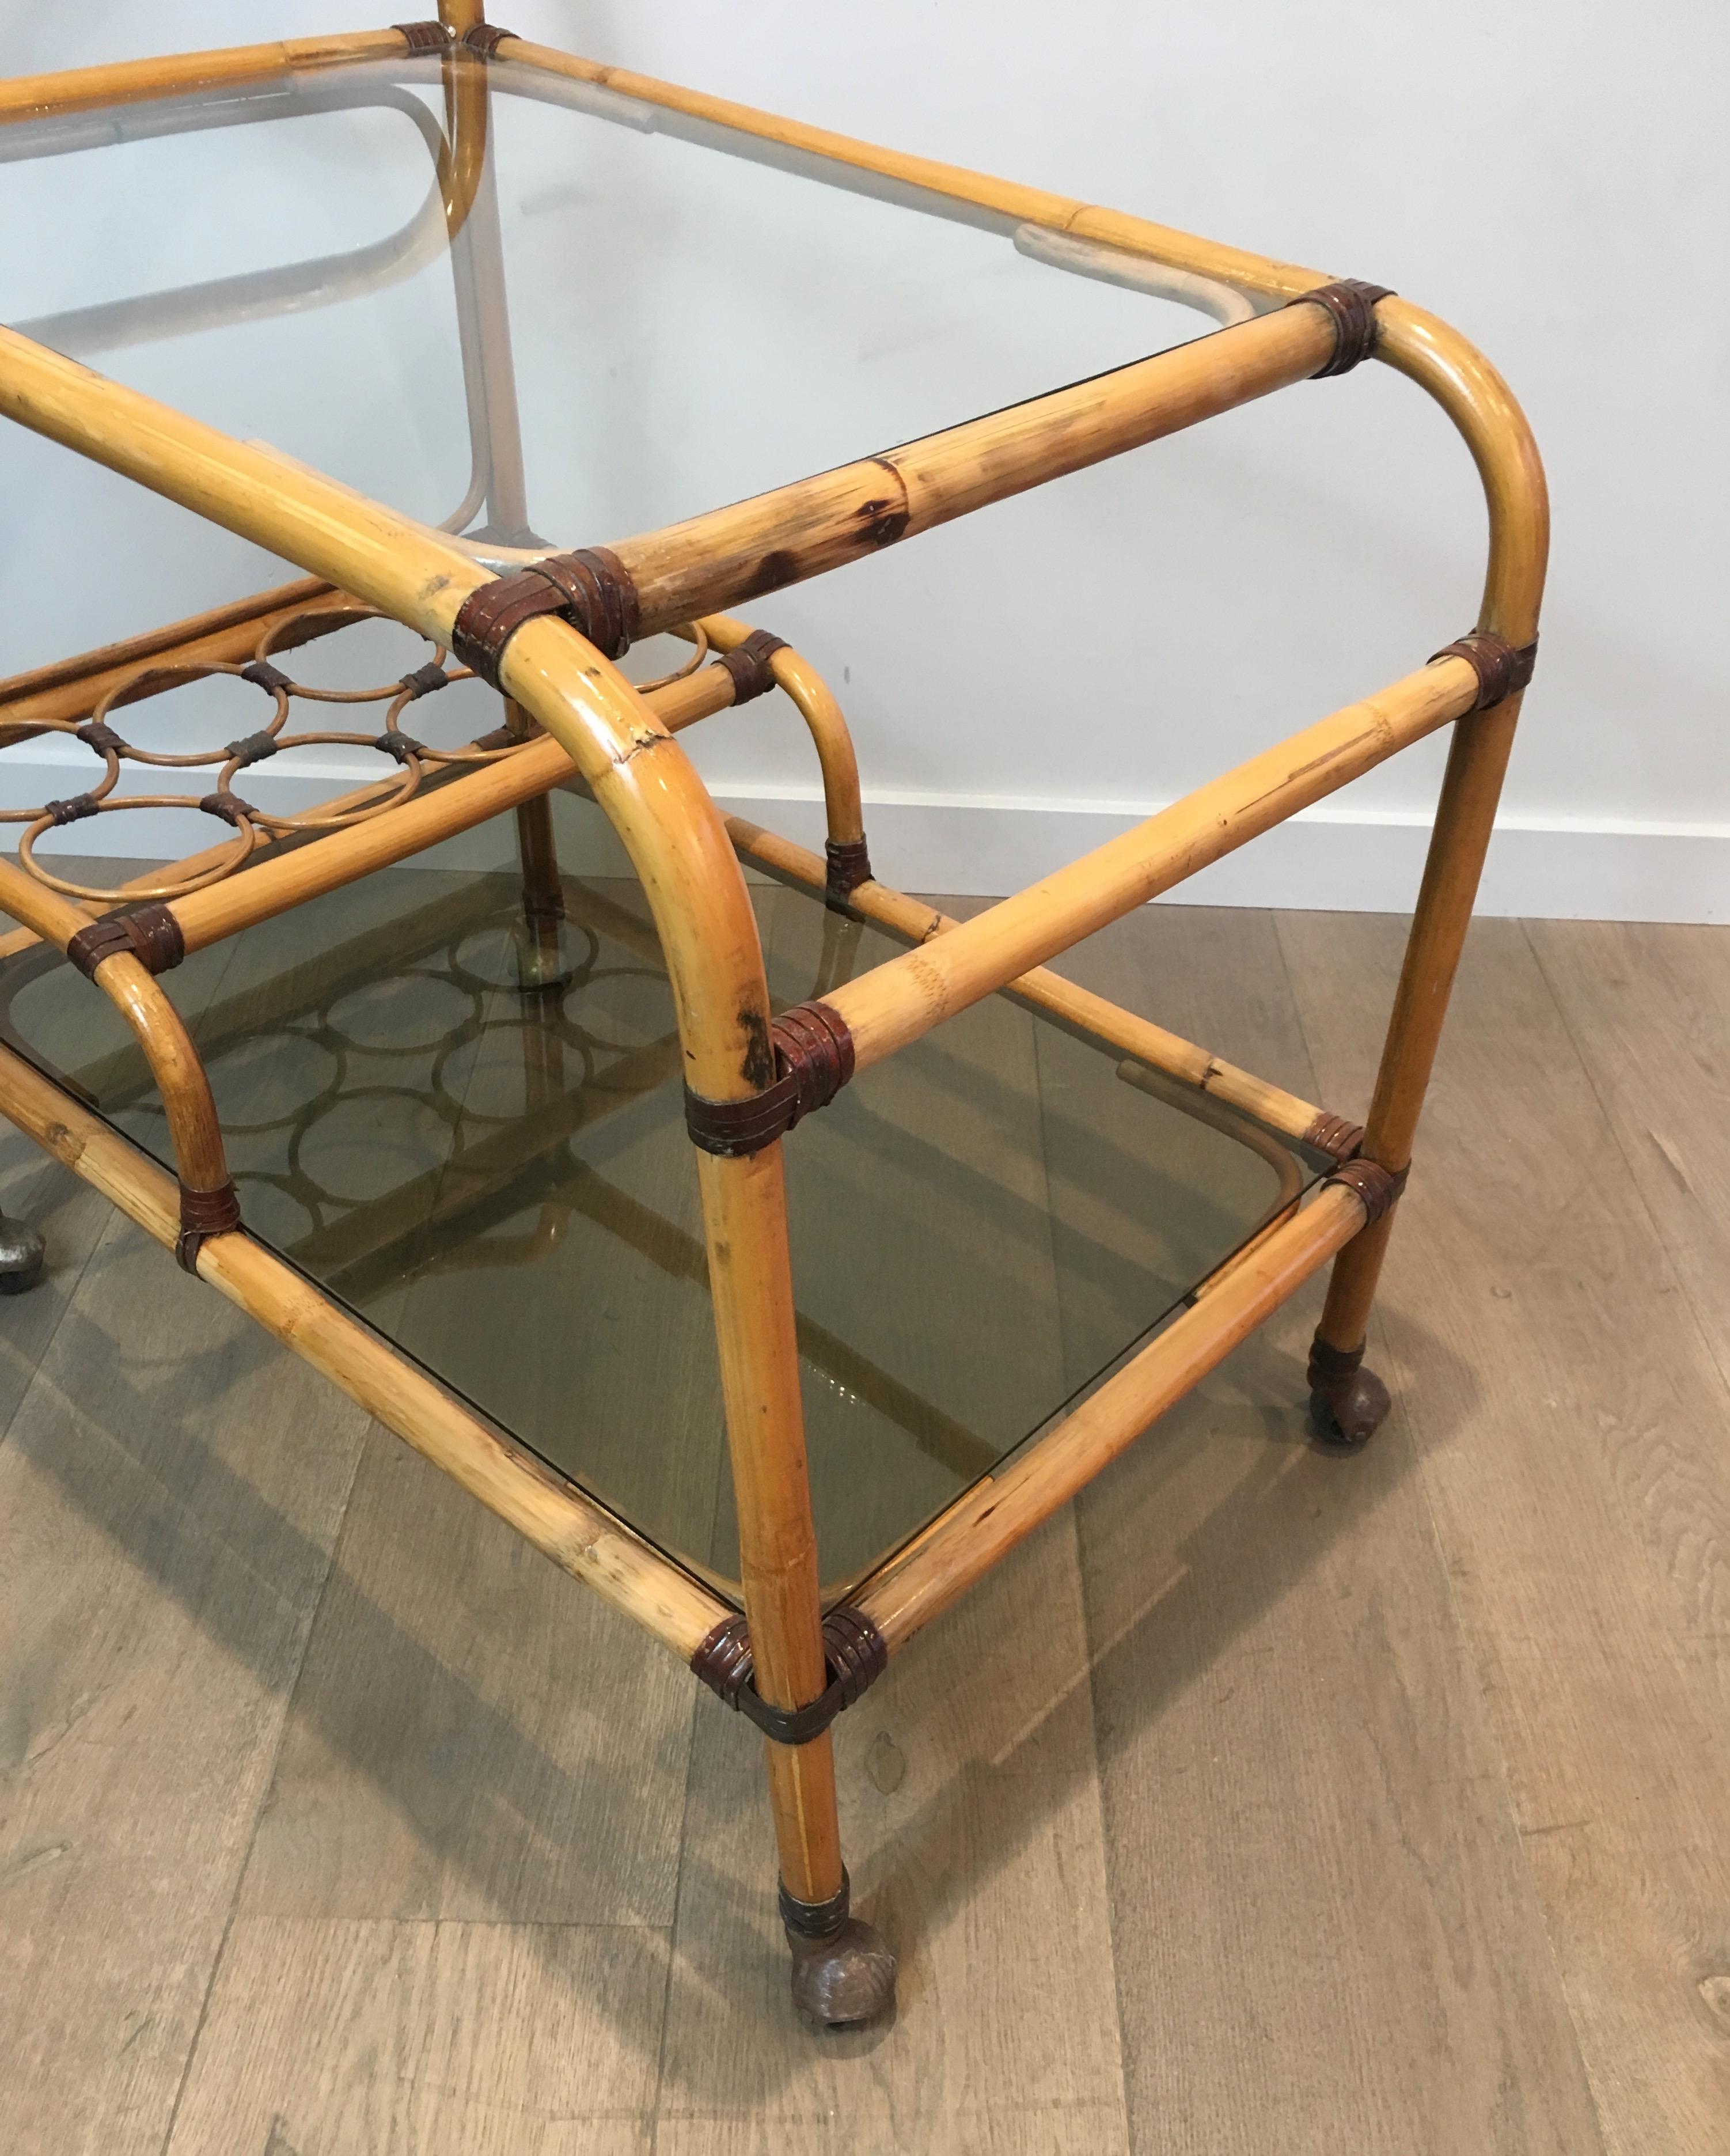 Interesting Rattan Drinks Trolley with Leather Links, French, circa 1950 For Sale 2